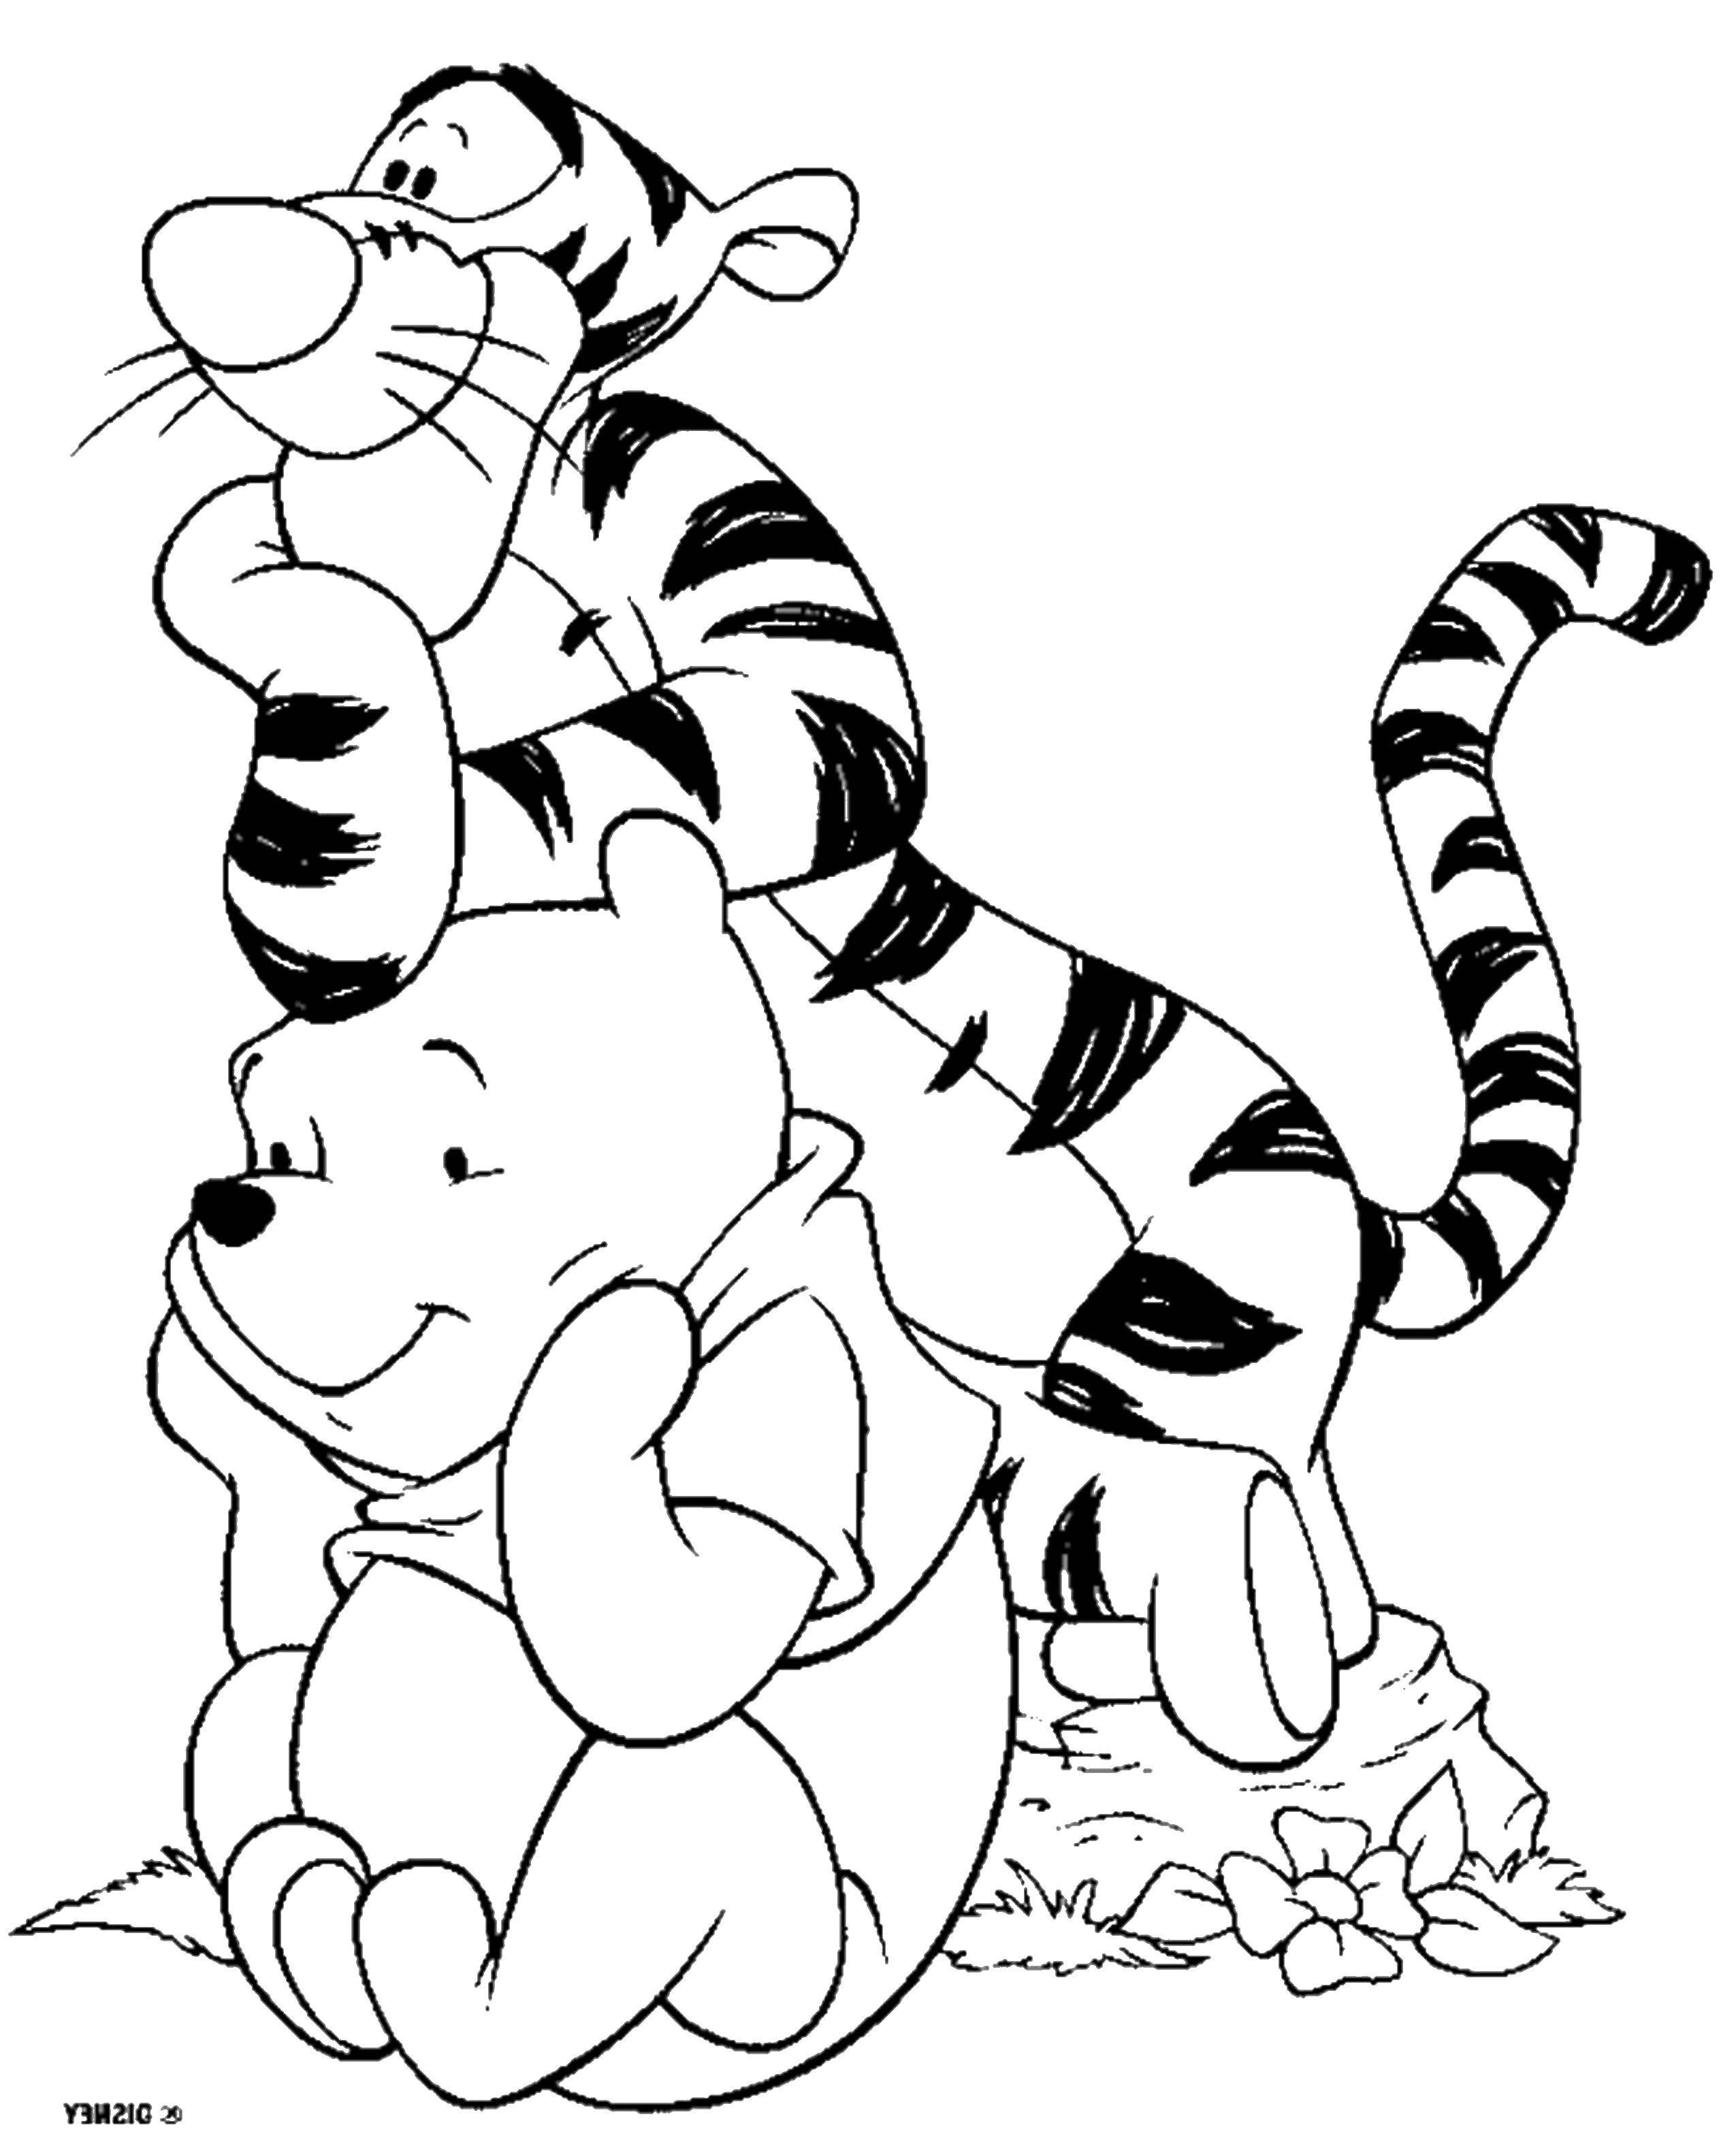 Coloring Tiger and Pooh sit and look into the distance. Category Coloring pages for kids. Tags:  Tigger, Winnie the Pooh.